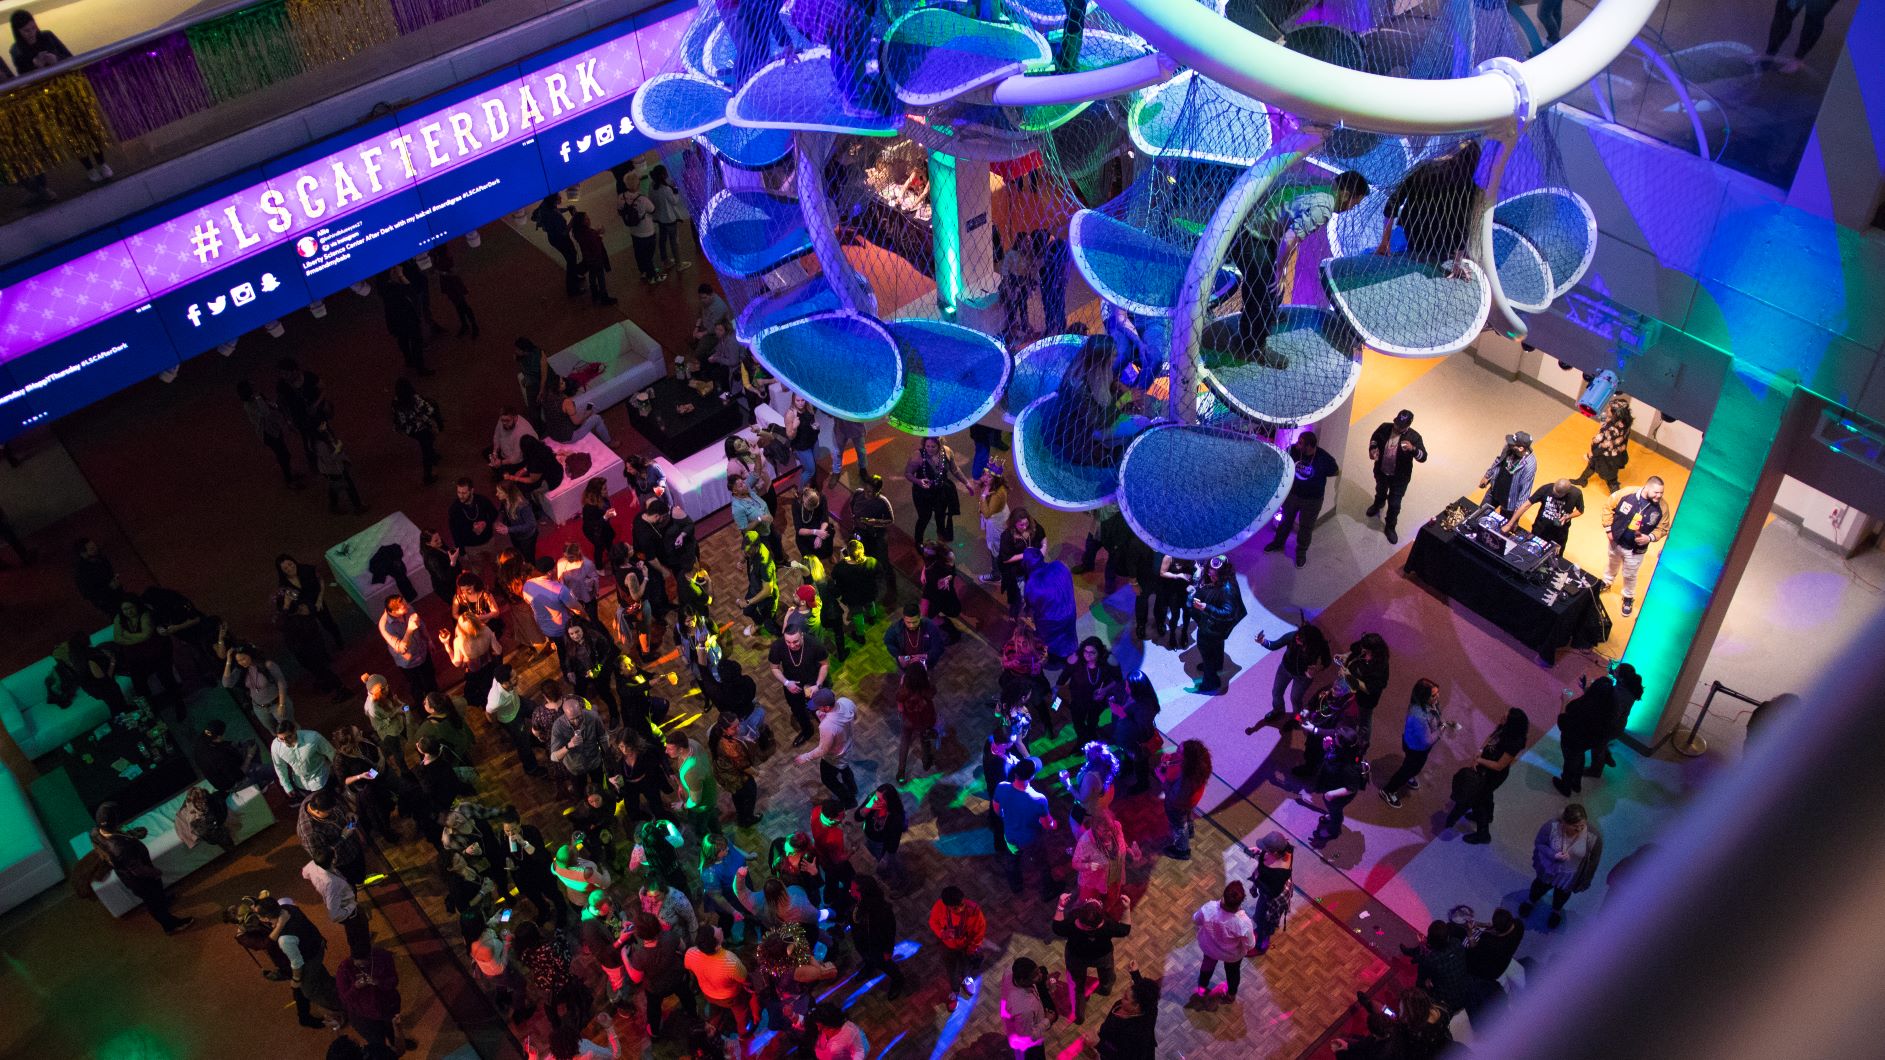 Overhead view of the LSC AfterDark crowd below that is lined with dancers dj and seating areas with white sofas.